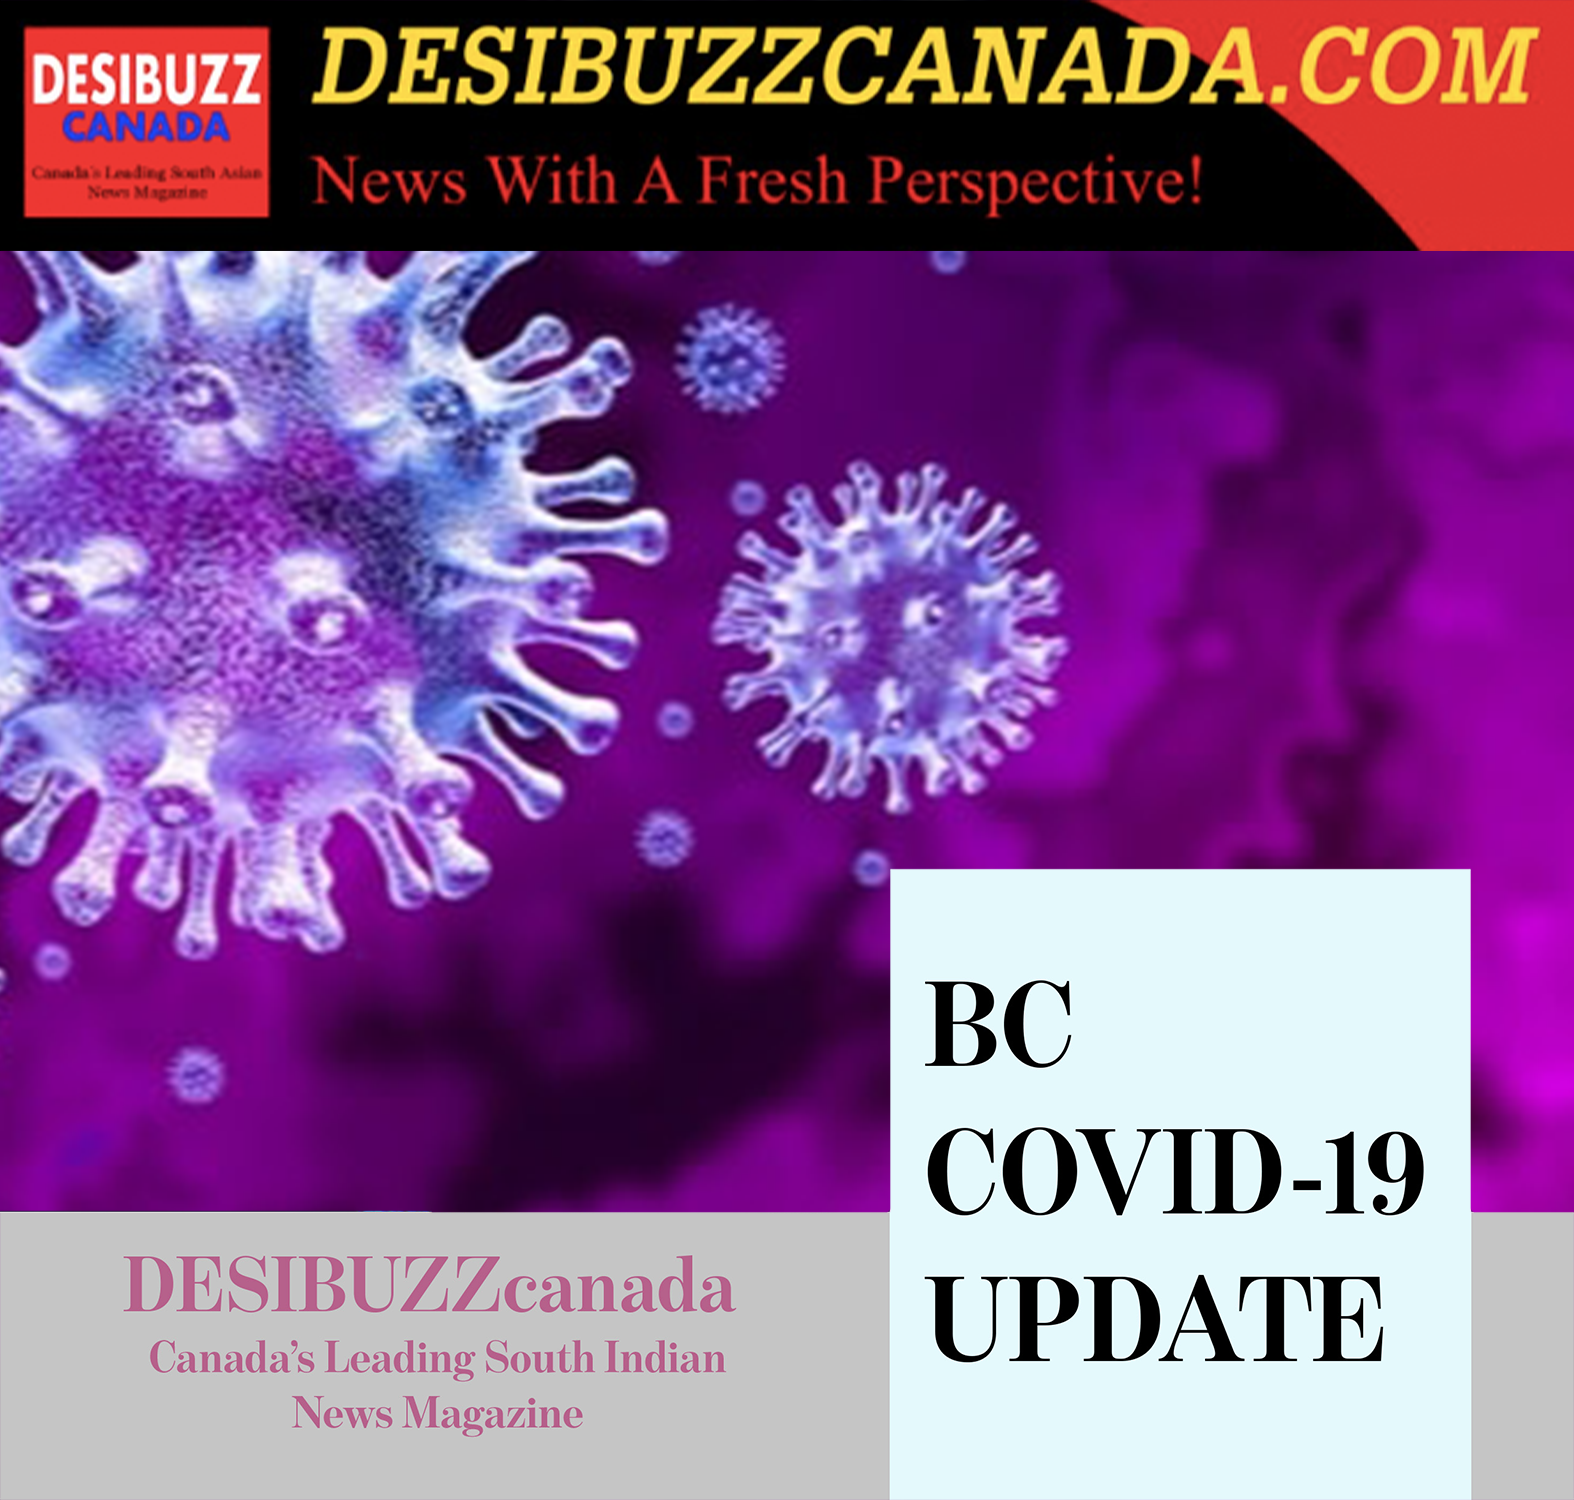 BC COVID-19 UPDATE: Deaths Return Wednesday With10 More Dead From The Virus